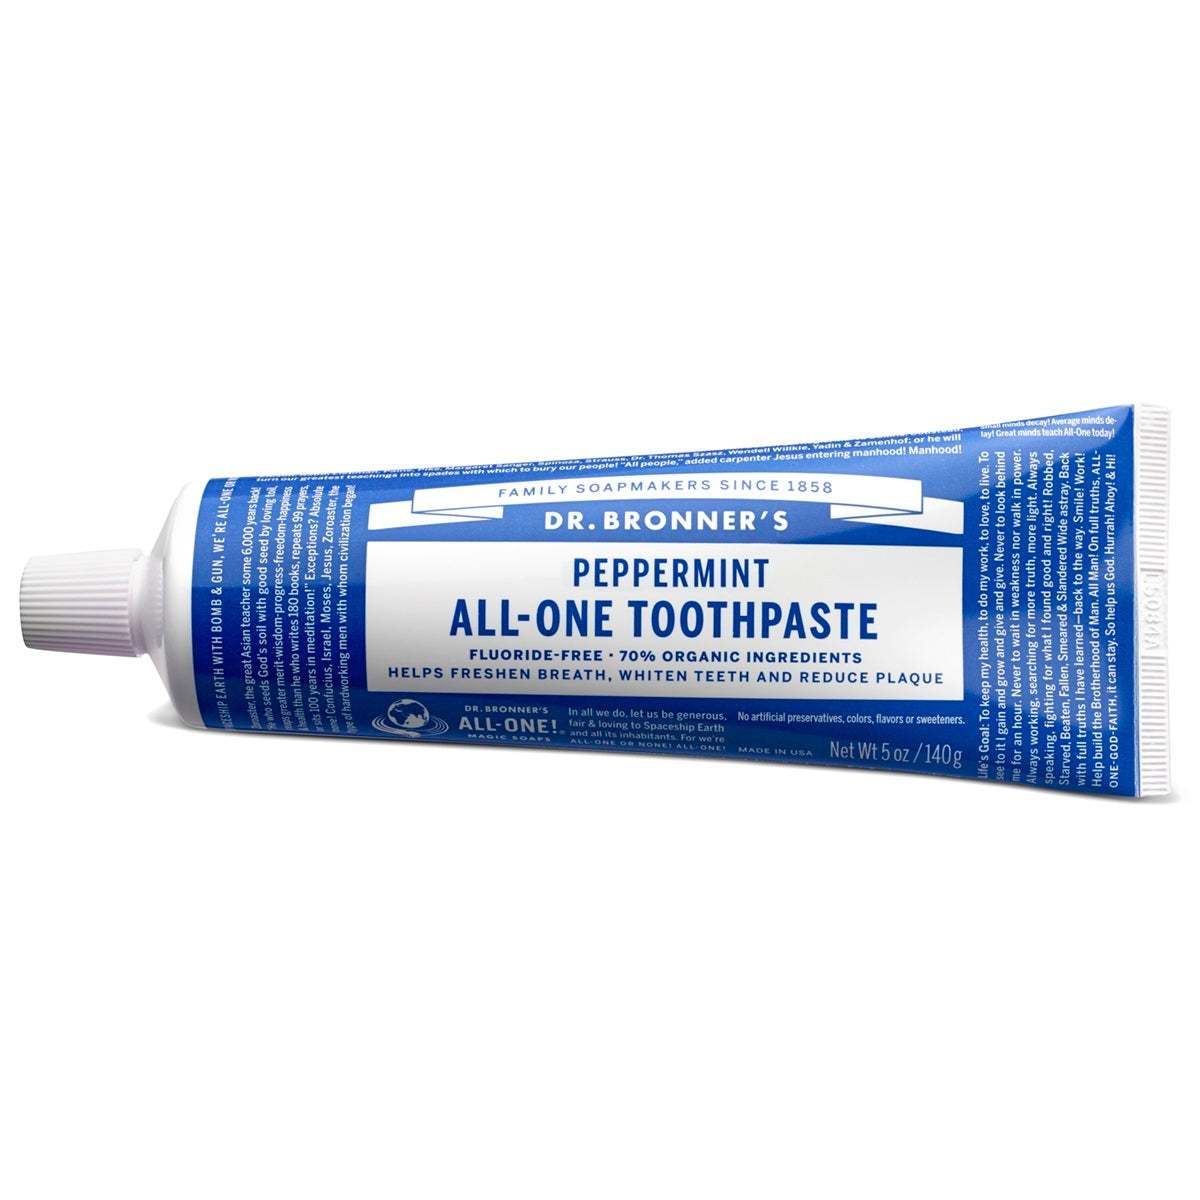 Primary image of Peppermint Toothpaste